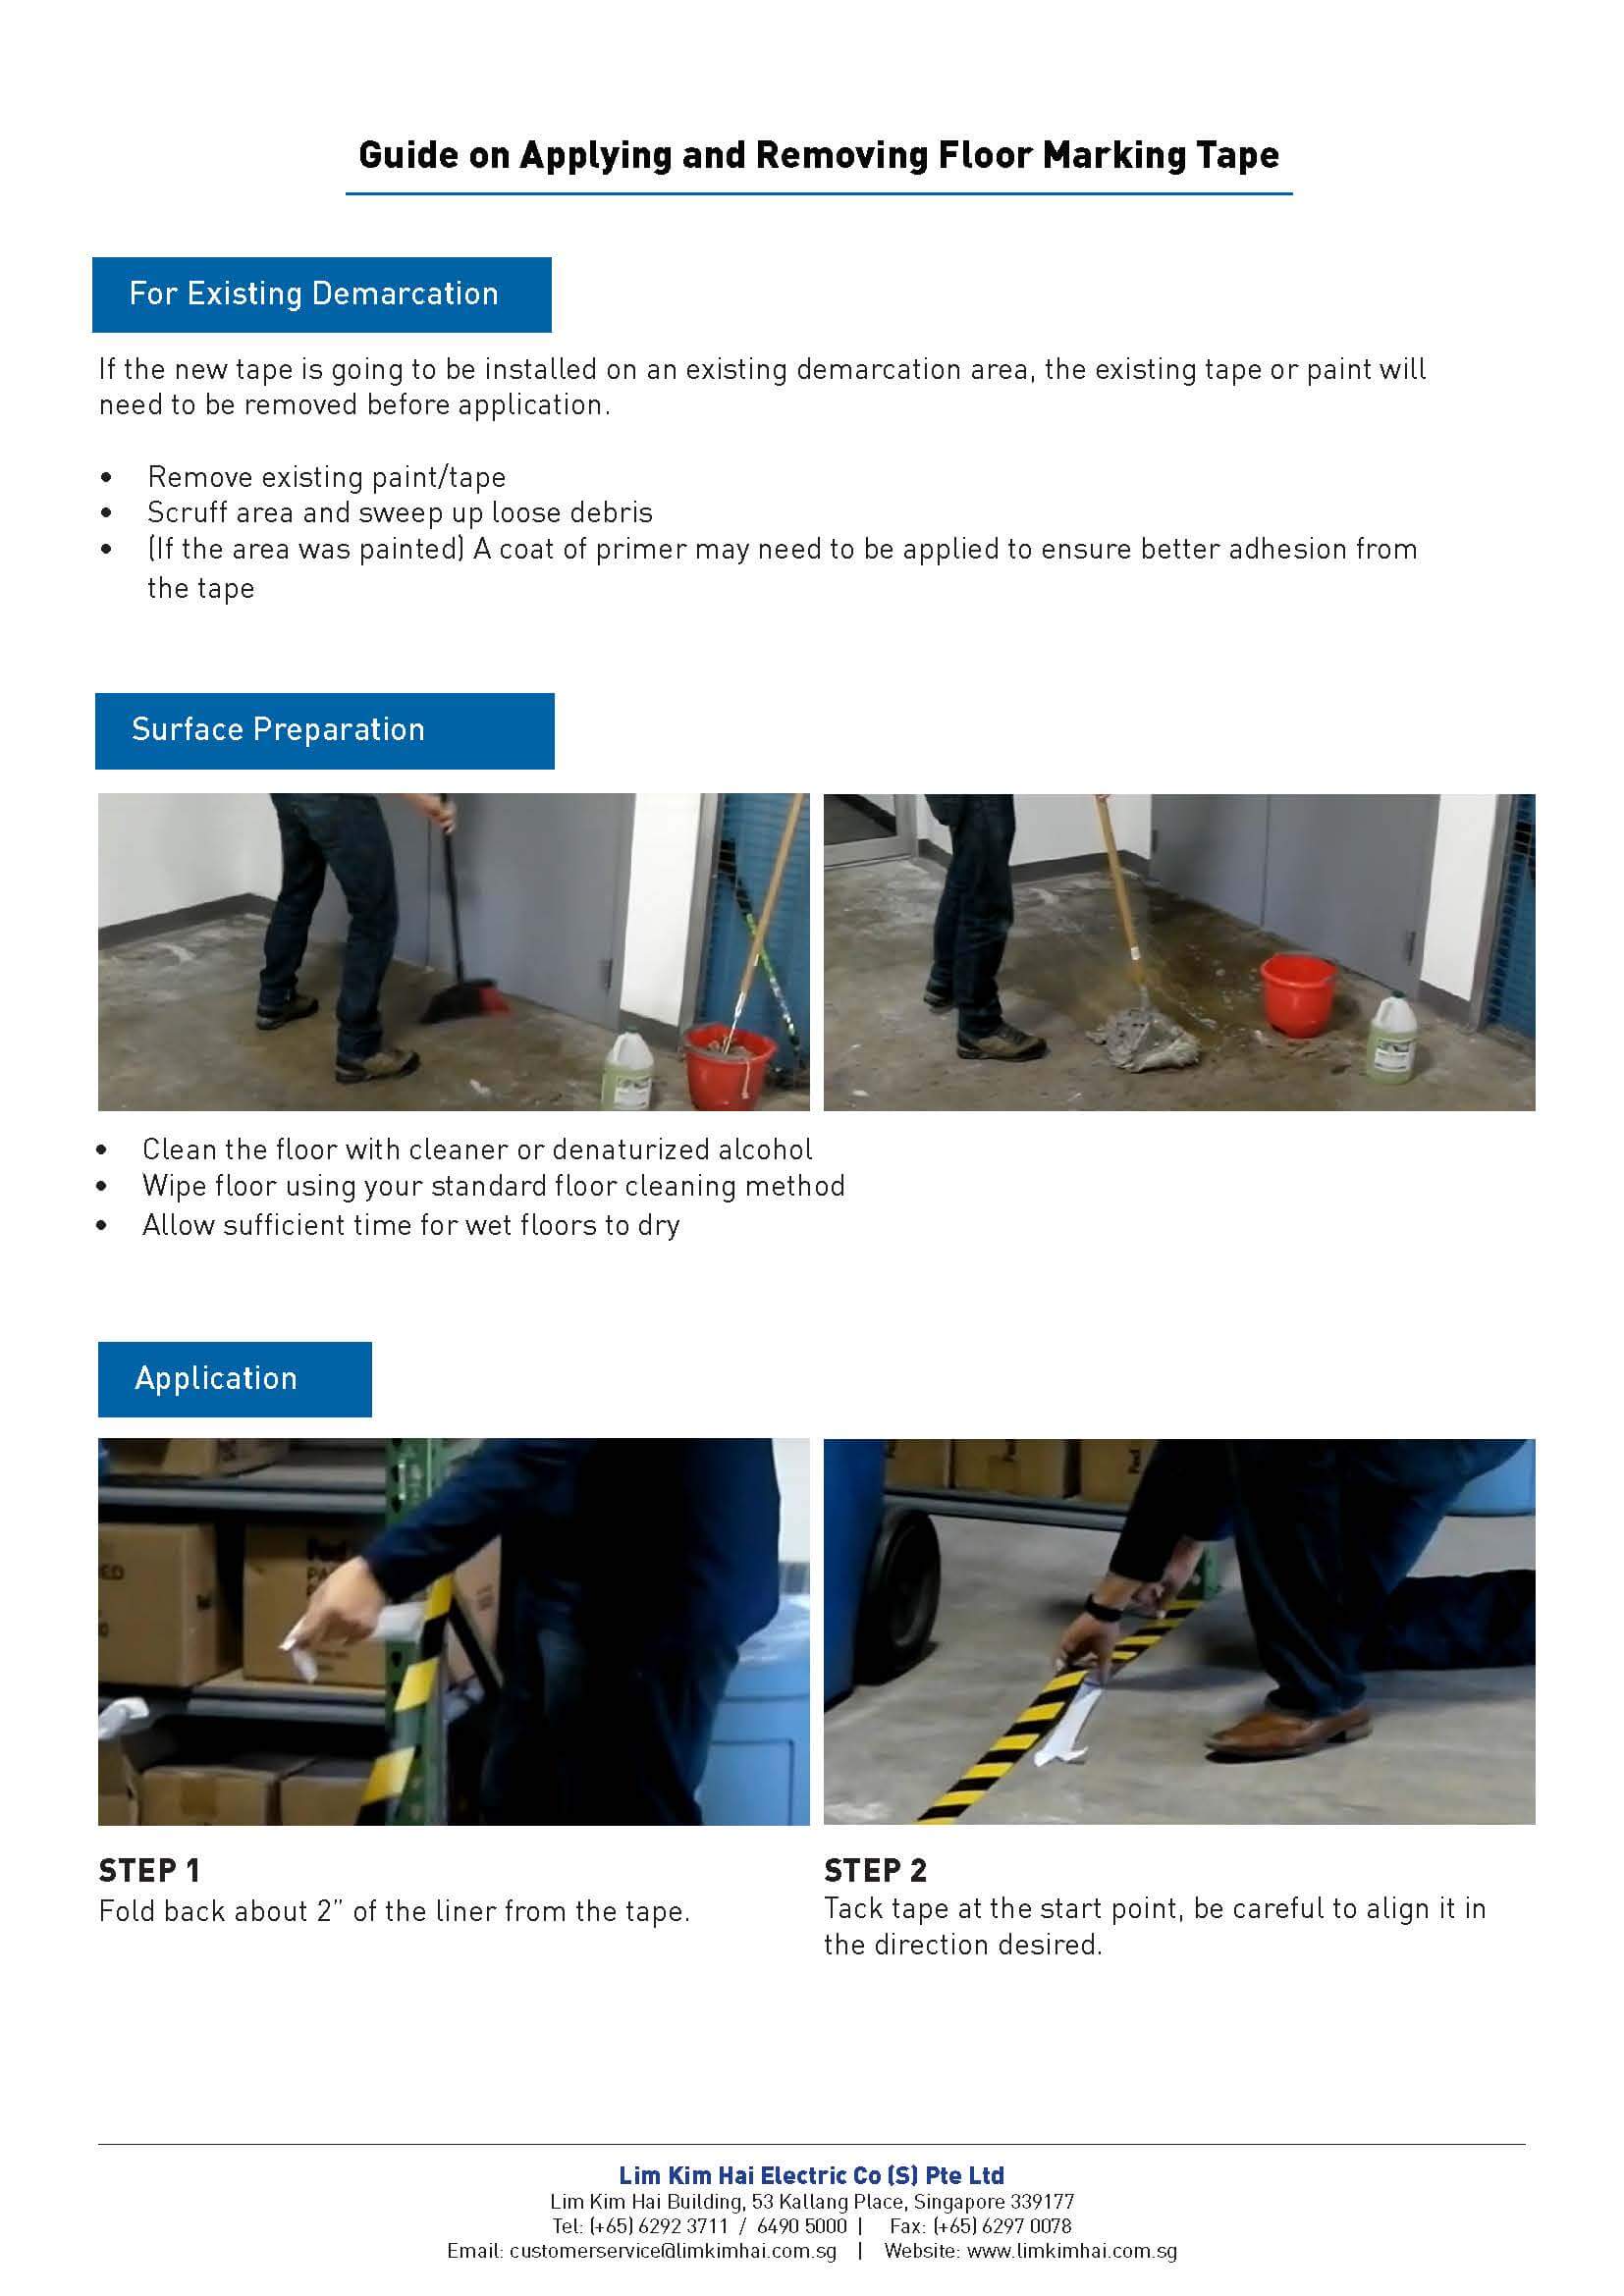 Guide on Applying Floor Marking Tape_Page